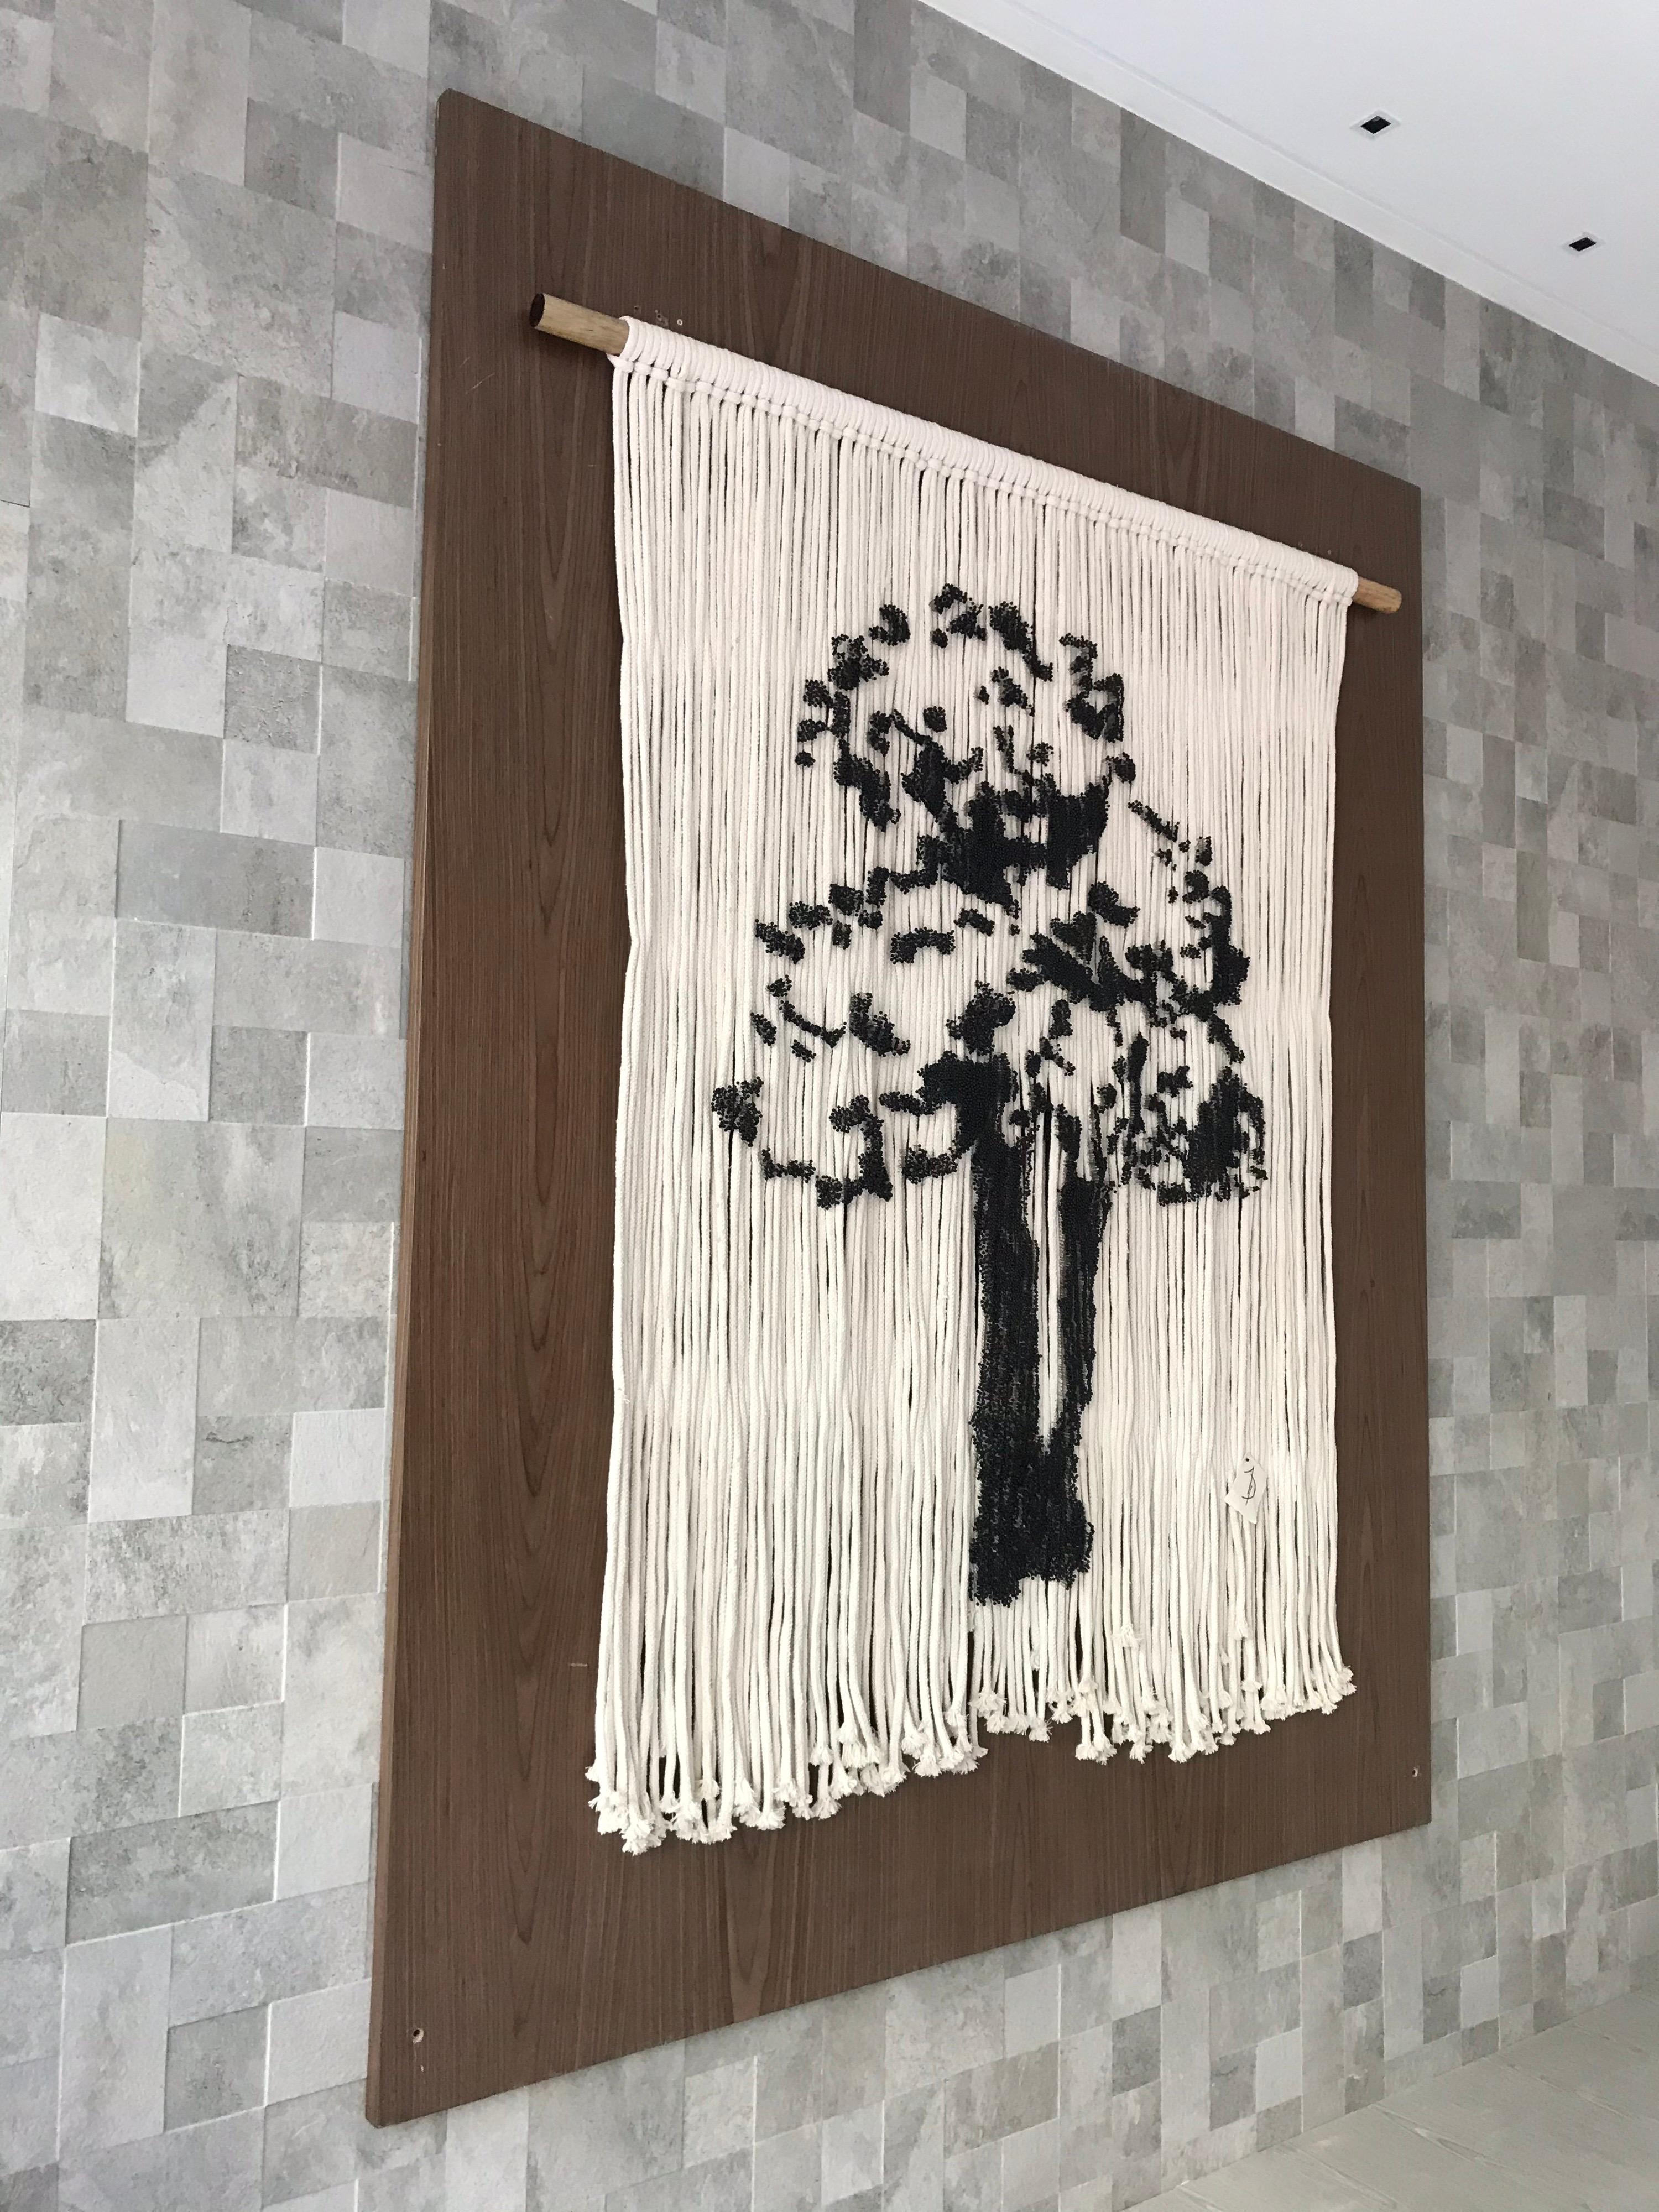 This elegant piece is handmade by two Mexican Artistis who managed to Project a tree silhouette upon cotton ropes. It is done with 17,570 delicately placed pins upon hanging ropes. The concentration of pins is what makes the shape of the tree